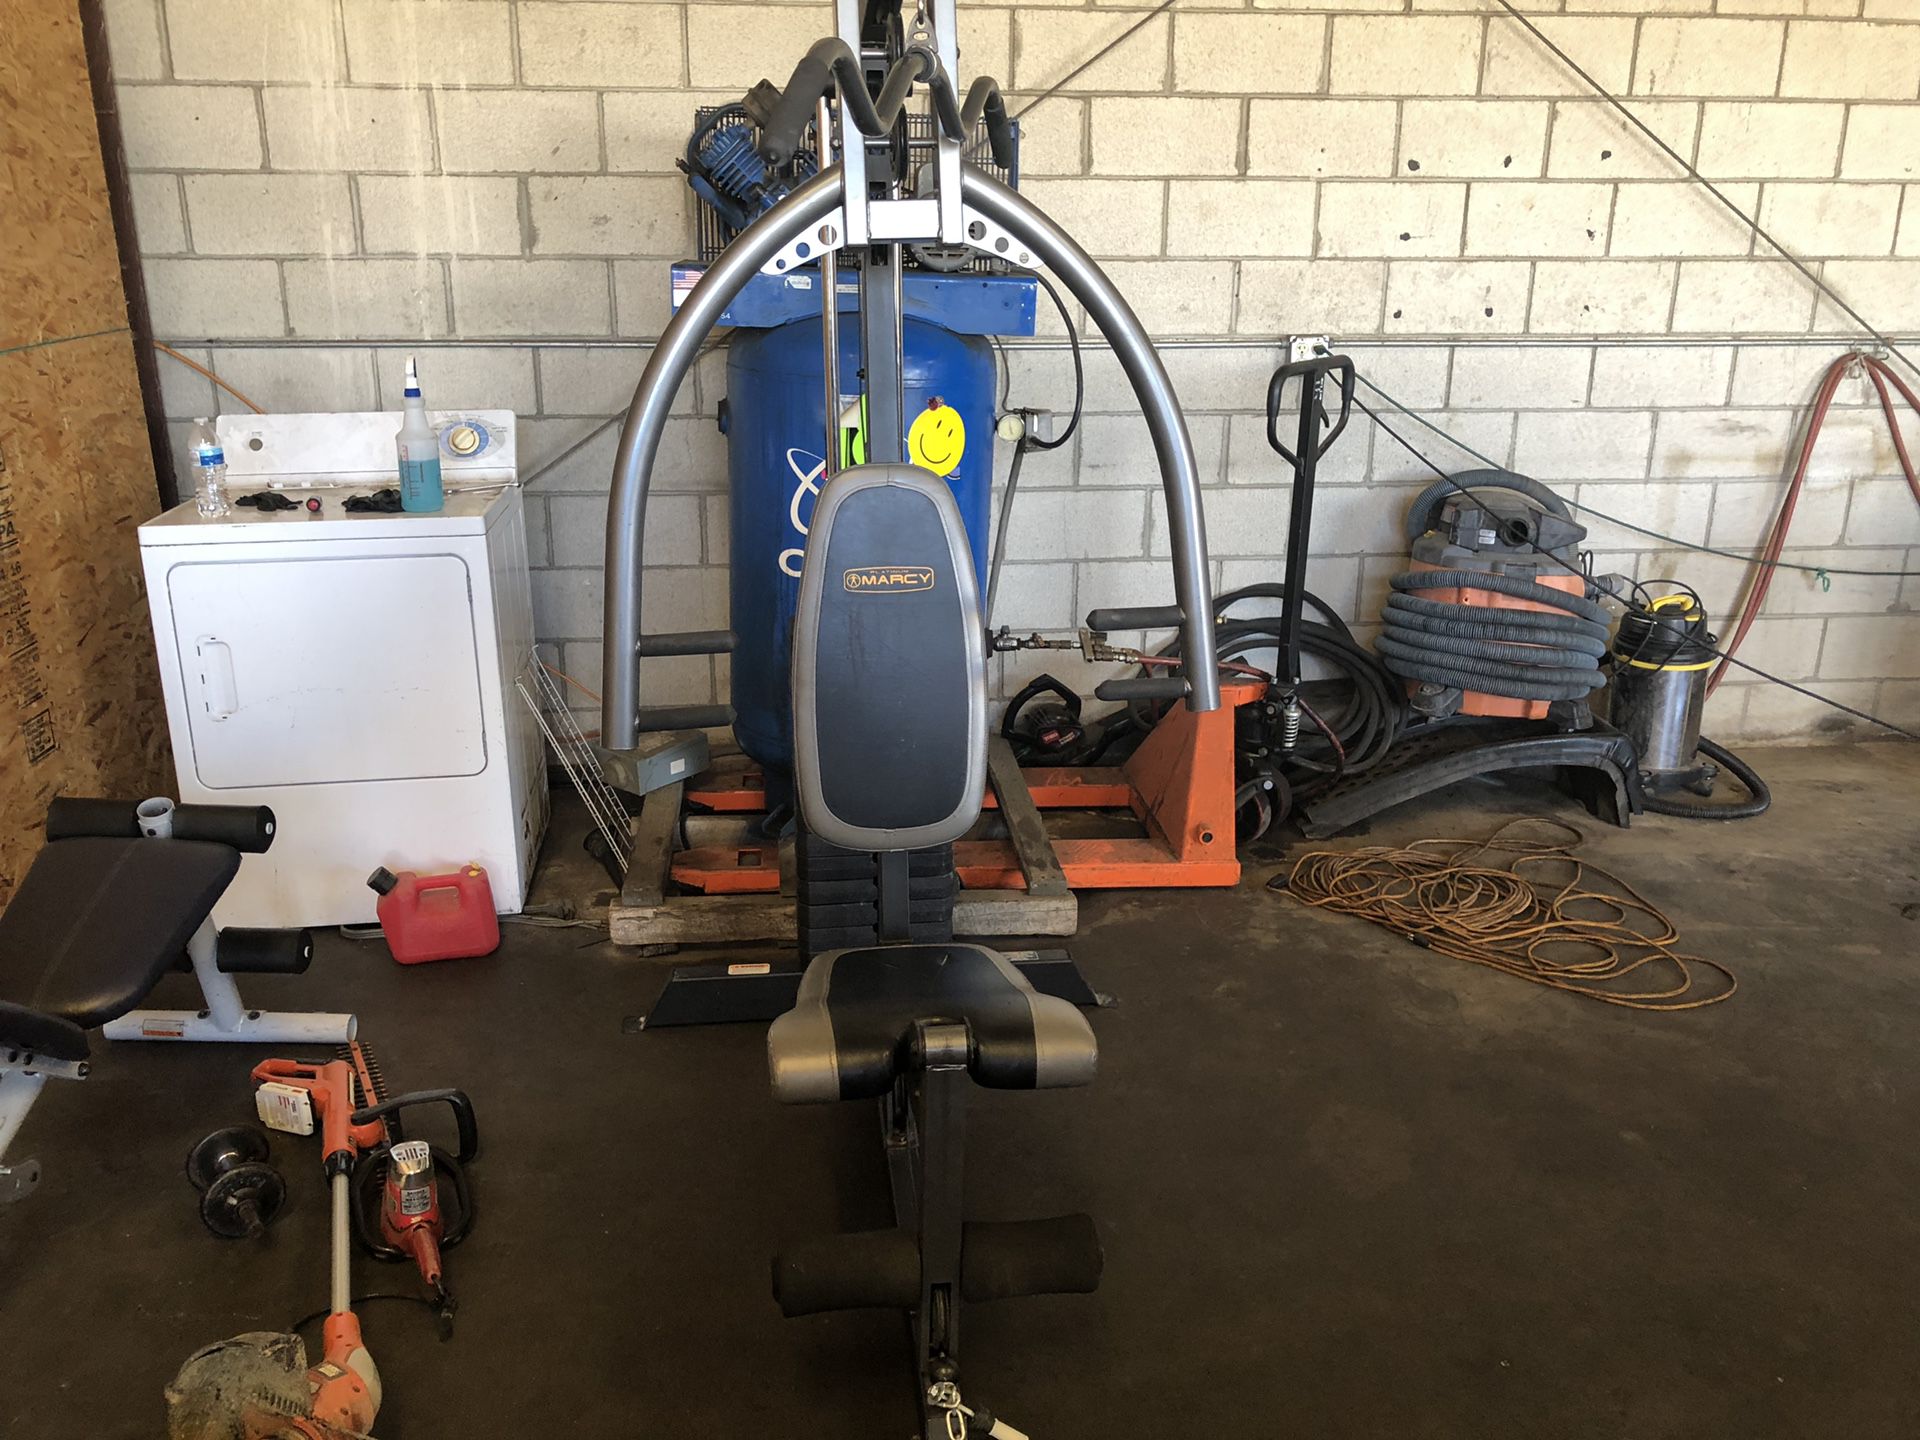 Platinum Marcy home gym paid full price from store few years ago hasn’t been used much in good condition as you can see. Cash only.